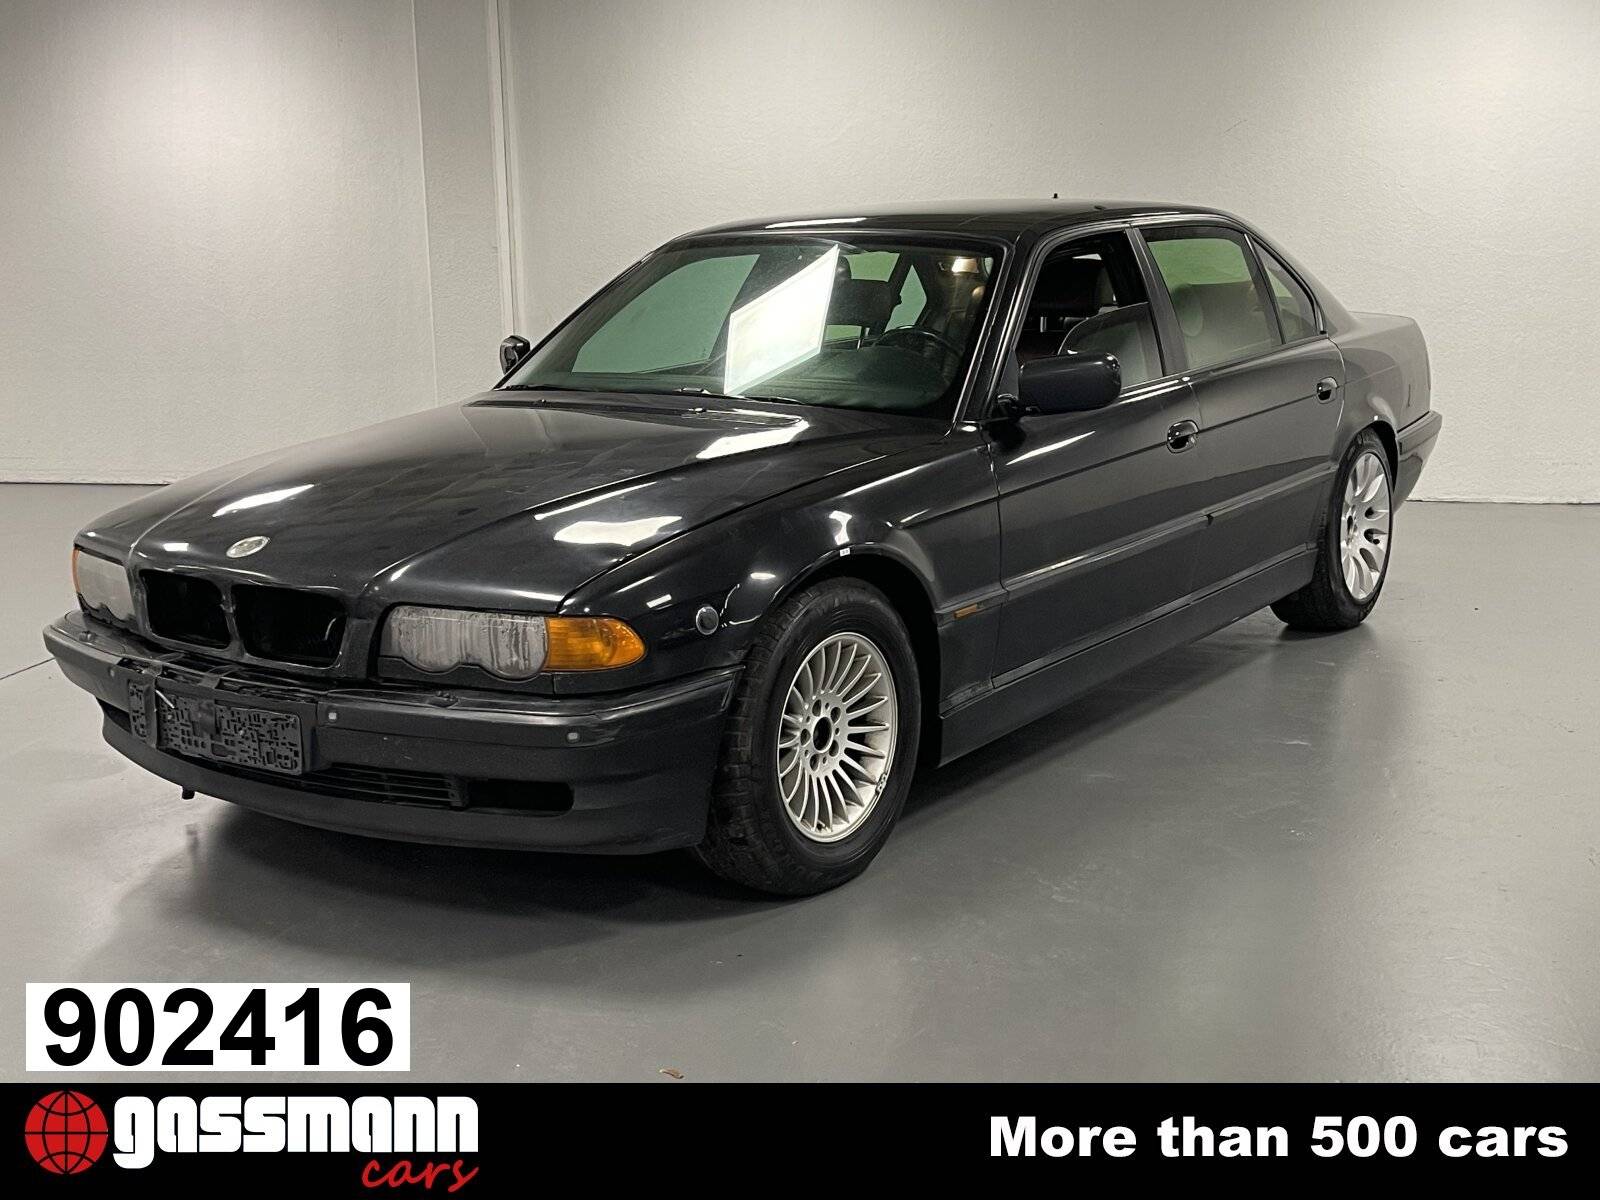 BMW 7 Series E38 Classic Cars for Sale - Classic Trader